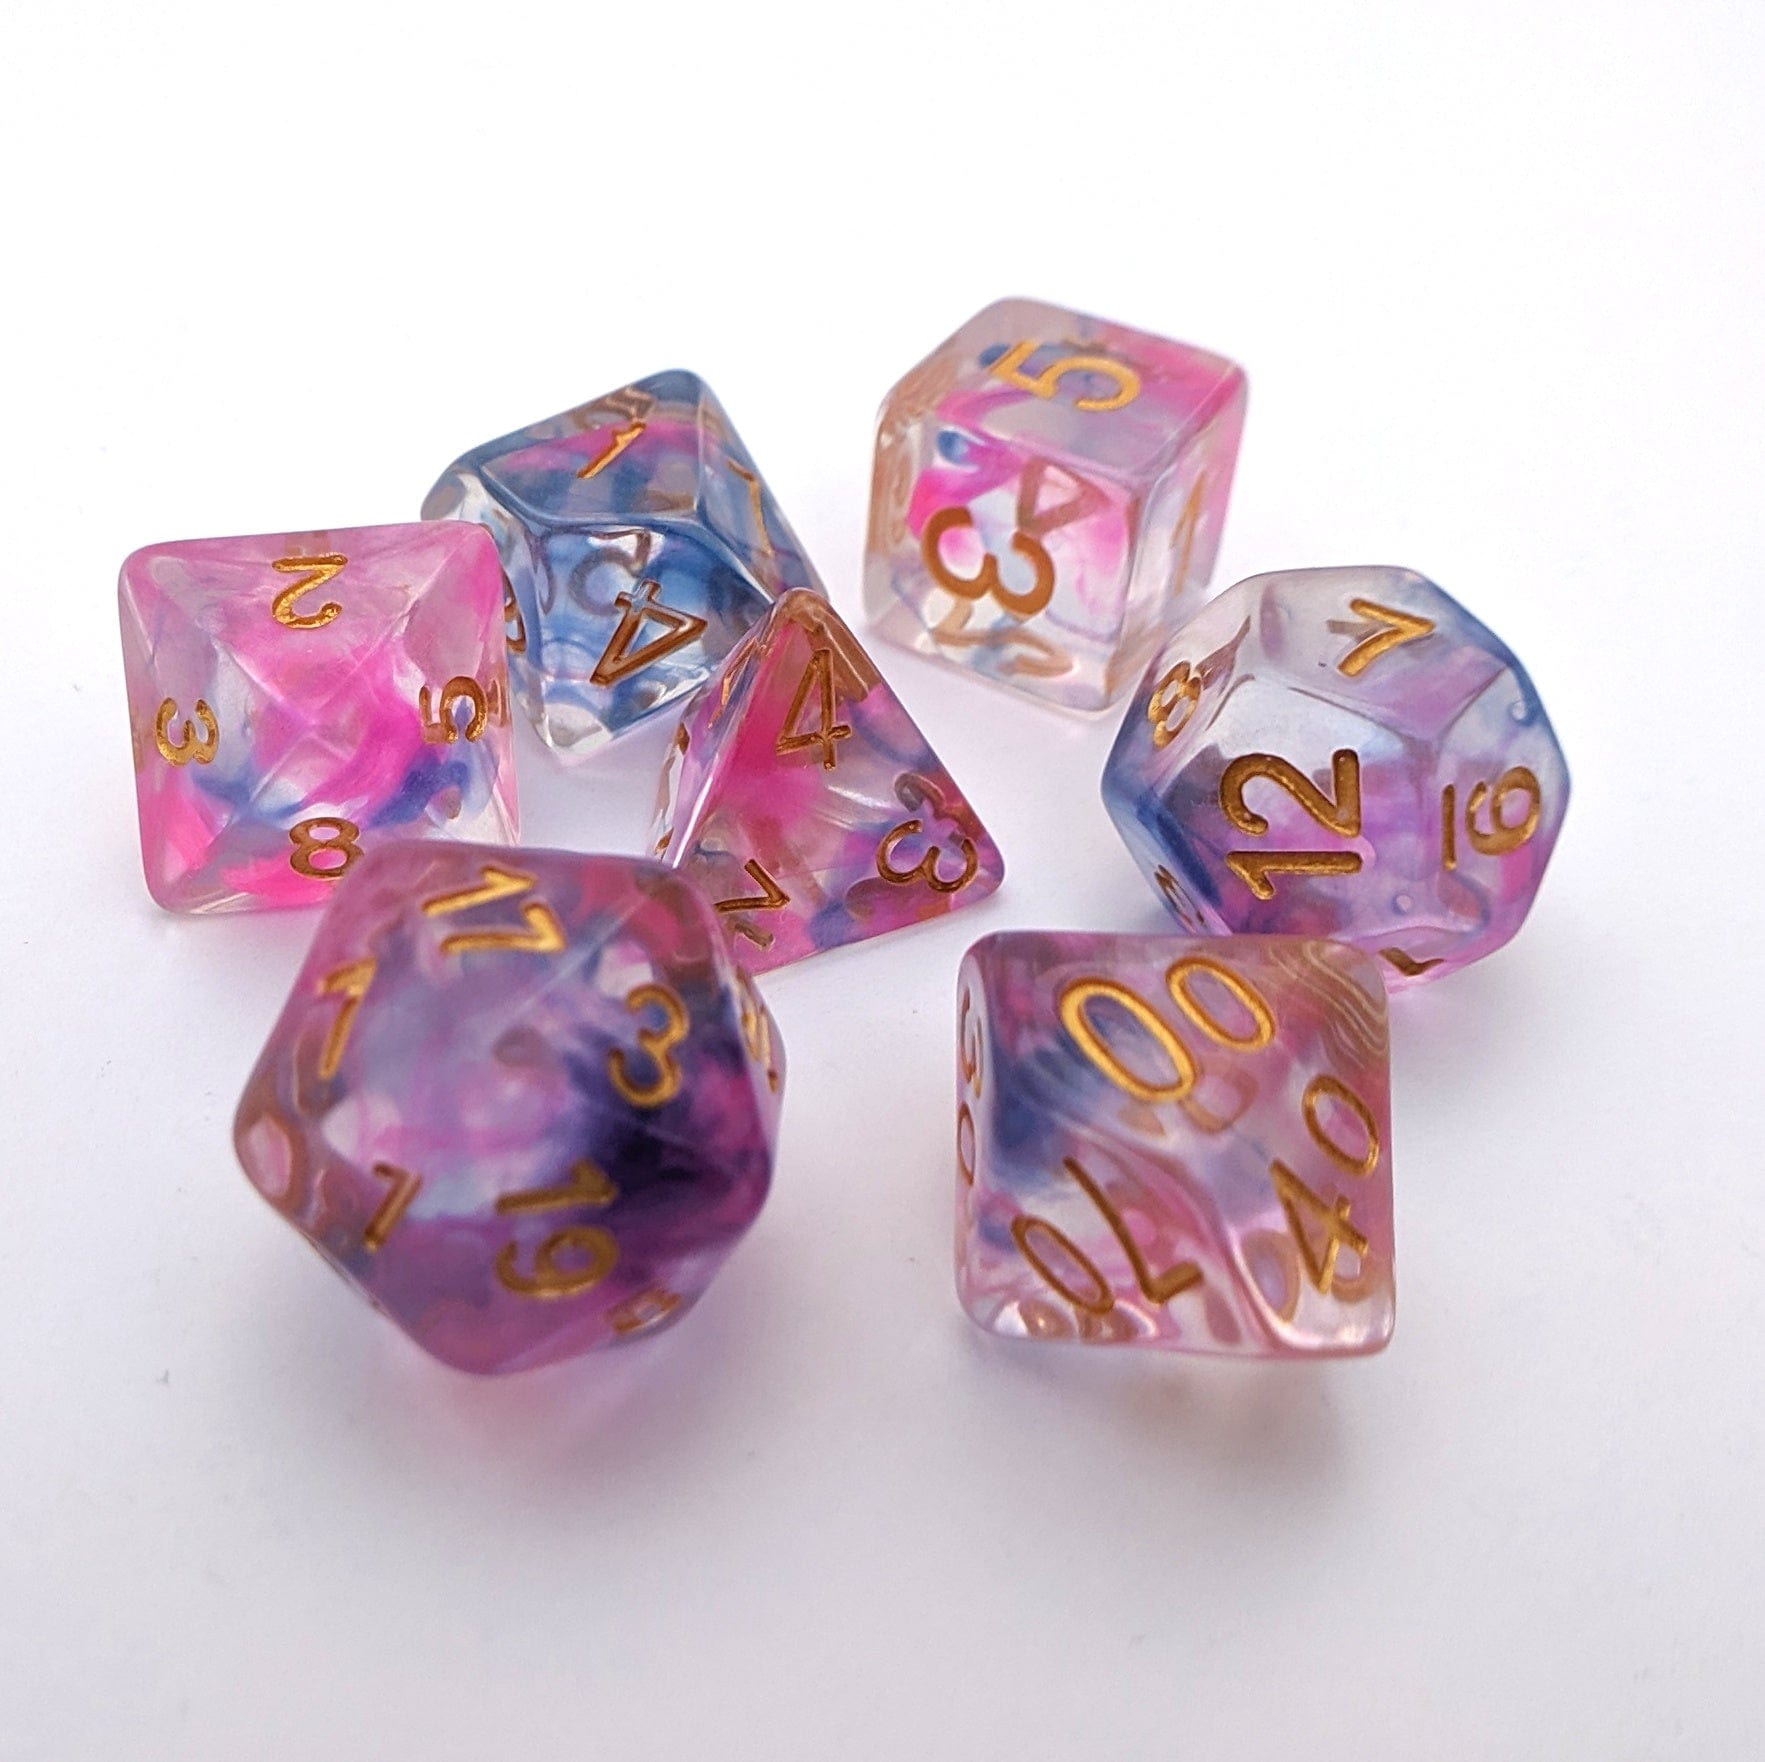 Morning Glory DnD Dice Set,  Pink and Blue Pearlized Ink Vapor Dice - CozyGamer